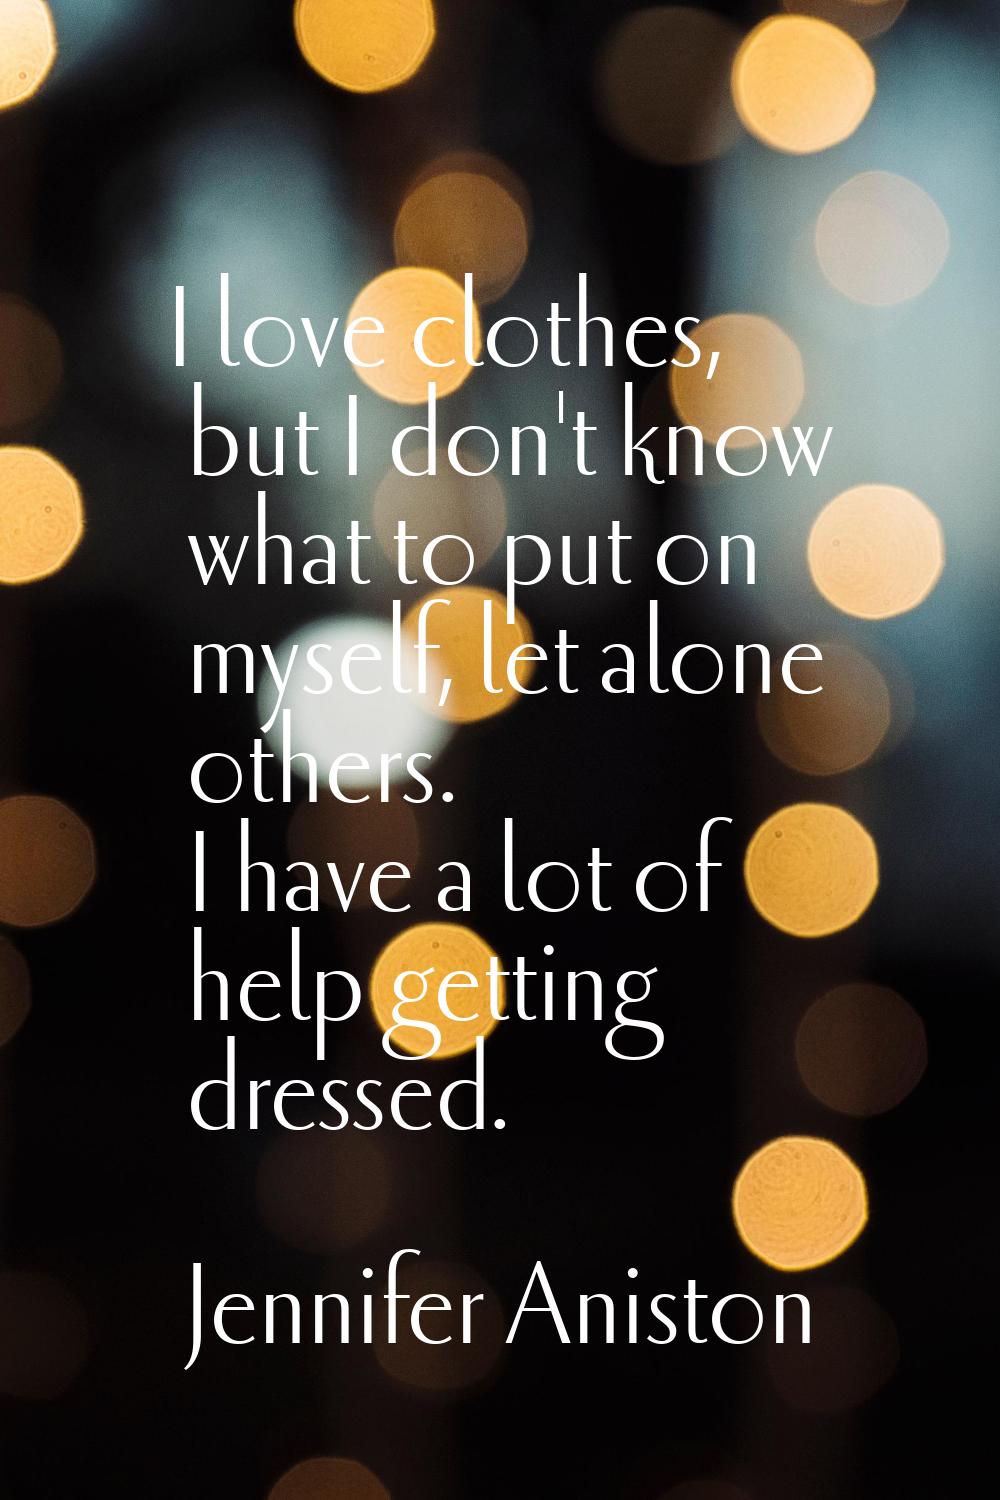 I love clothes, but I don't know what to put on myself, let alone others. I have a lot of help gett